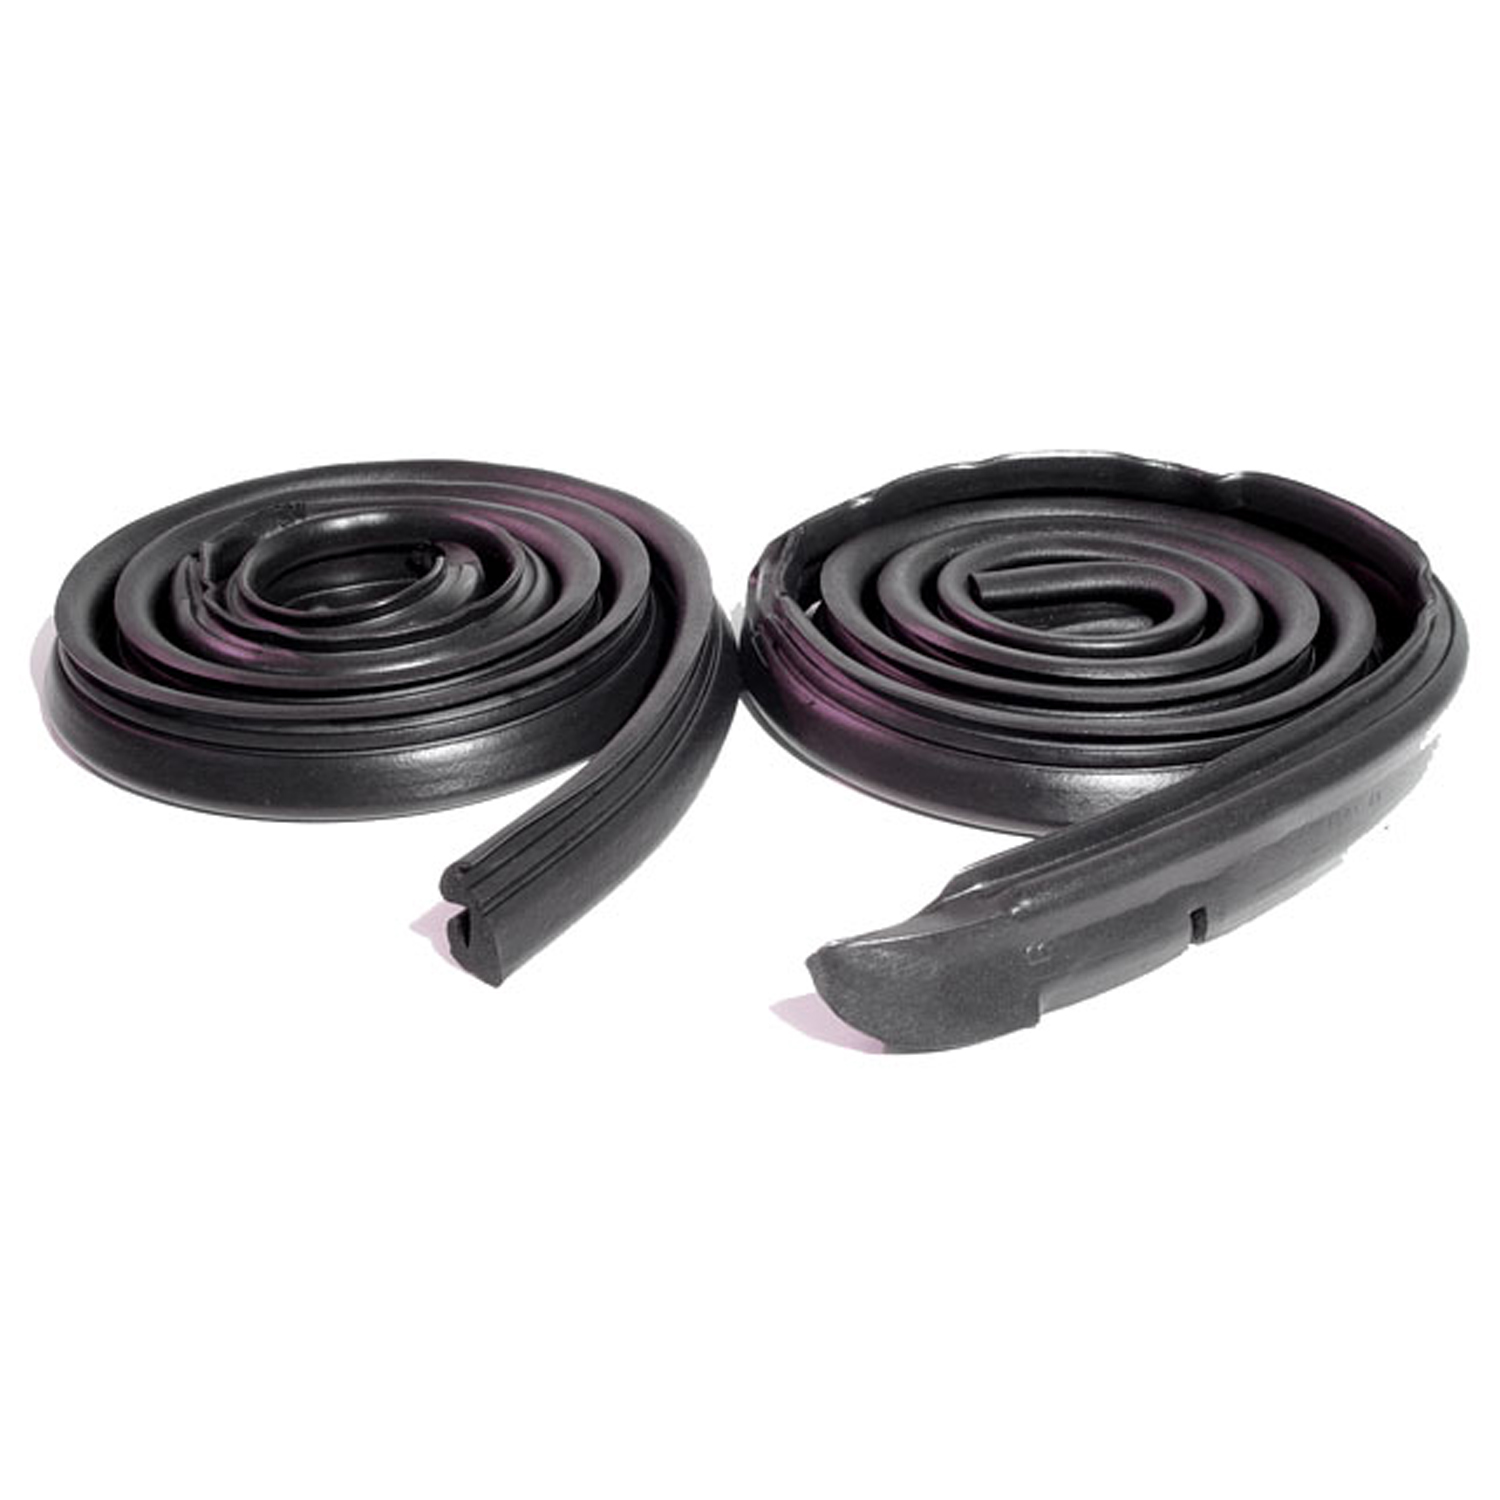 1966 Plymouth Fury Molded Roof Rail Seals, for 2-Door Hardtop without Post-RR 4001-C